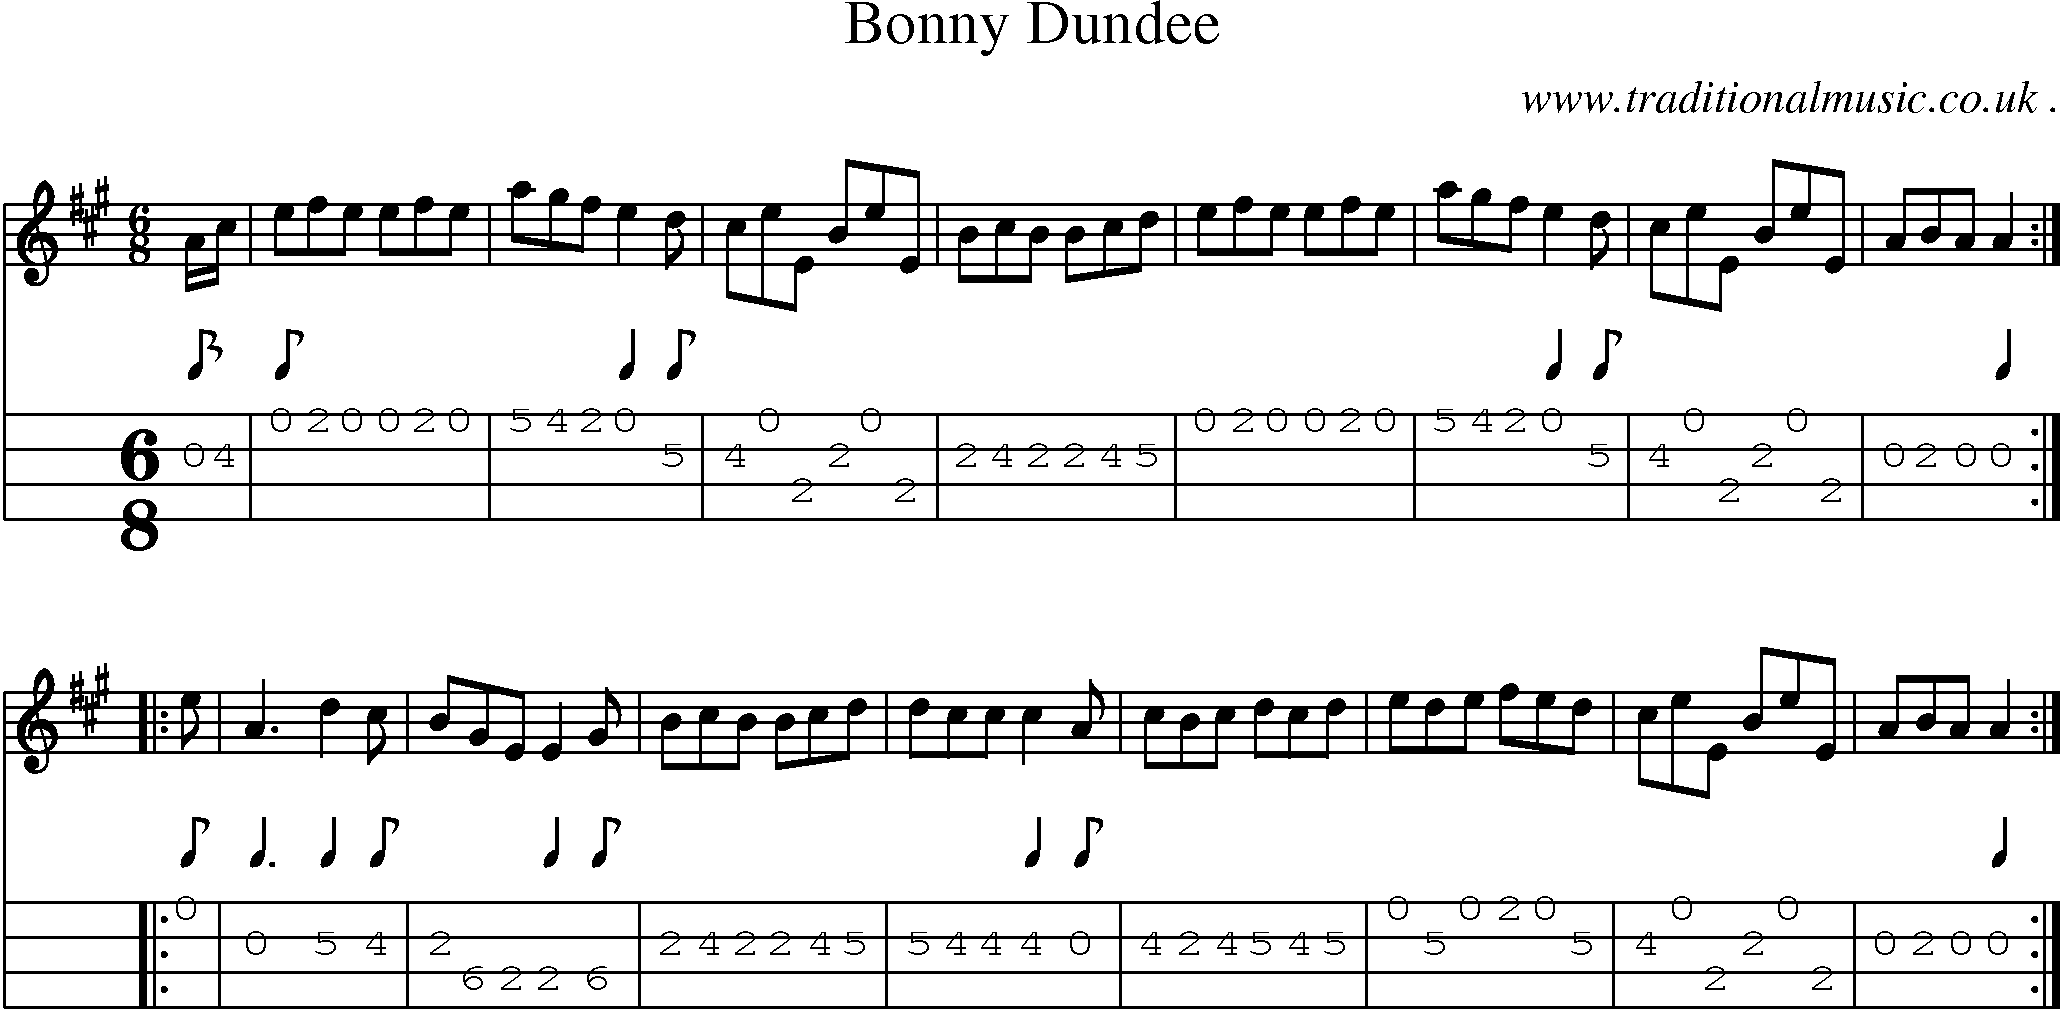 Sheet-music  score, Chords and Mandolin Tabs for Bonny Dundee